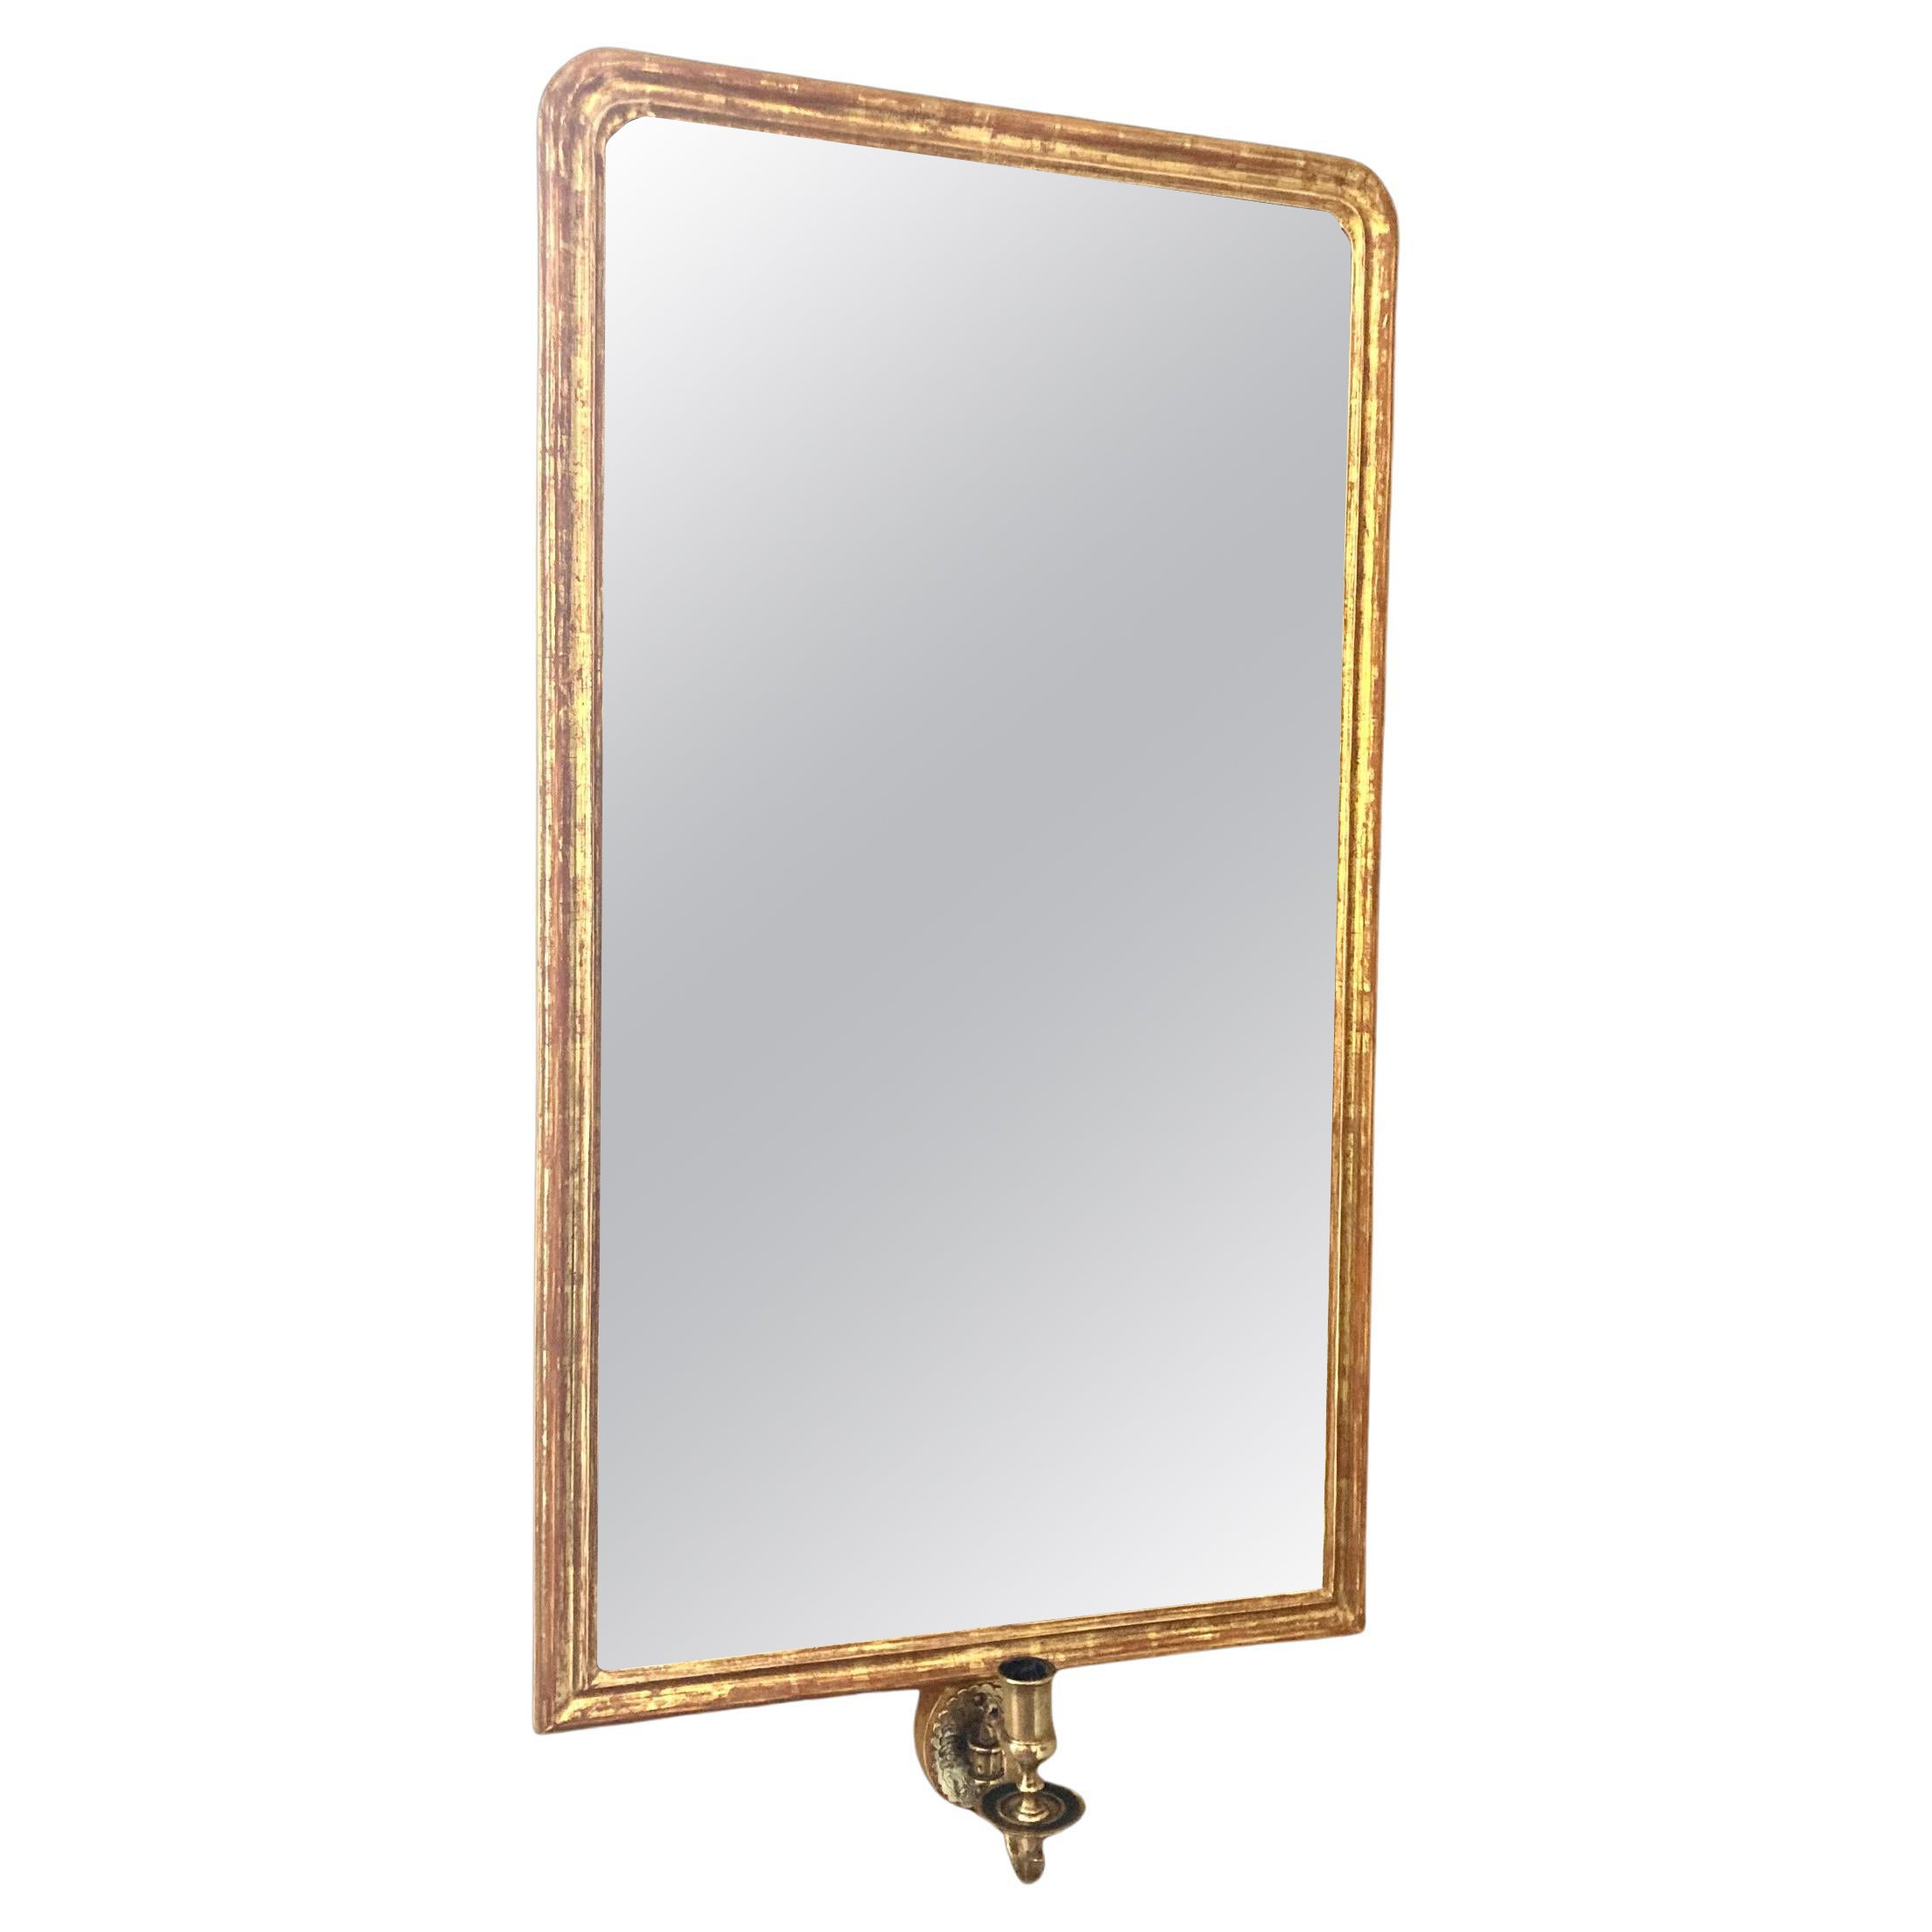 Giltwood wall mirror with single brass candle arm For Sale